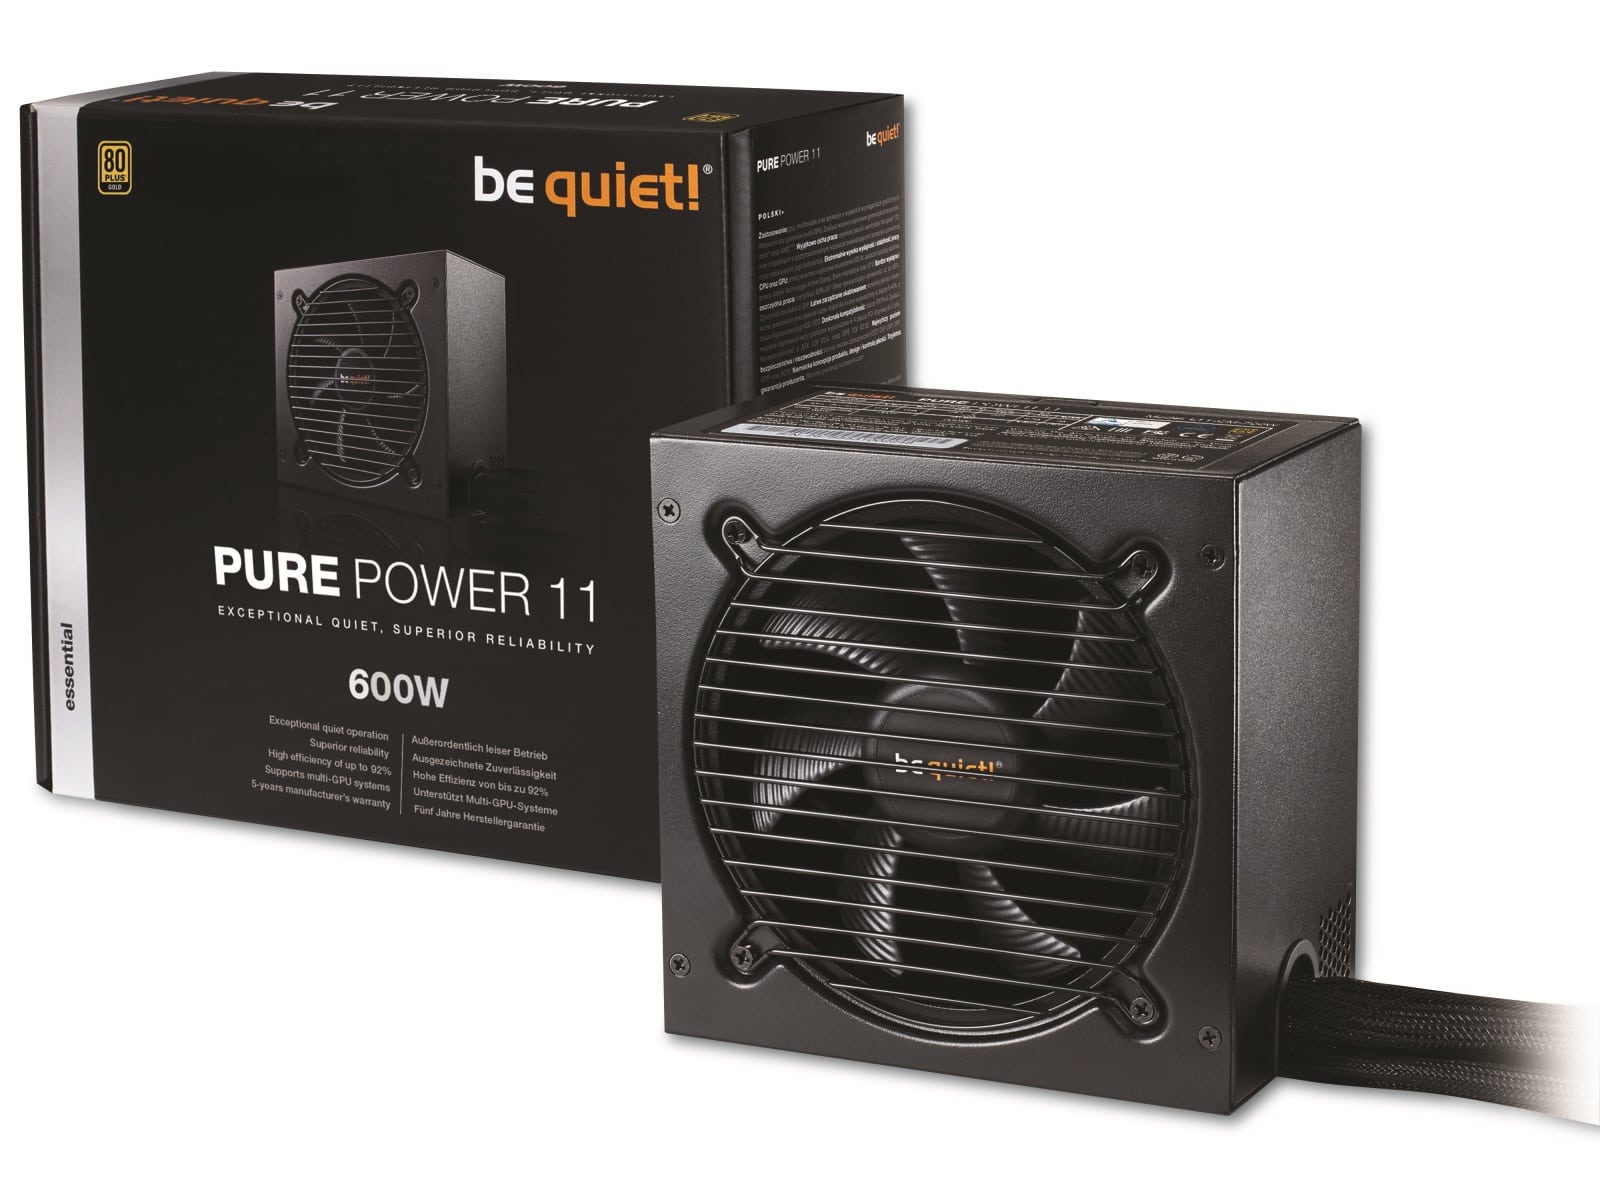 BE QUIET! PC-Netzteil Pure Power 11, 600W, 80+ Gold